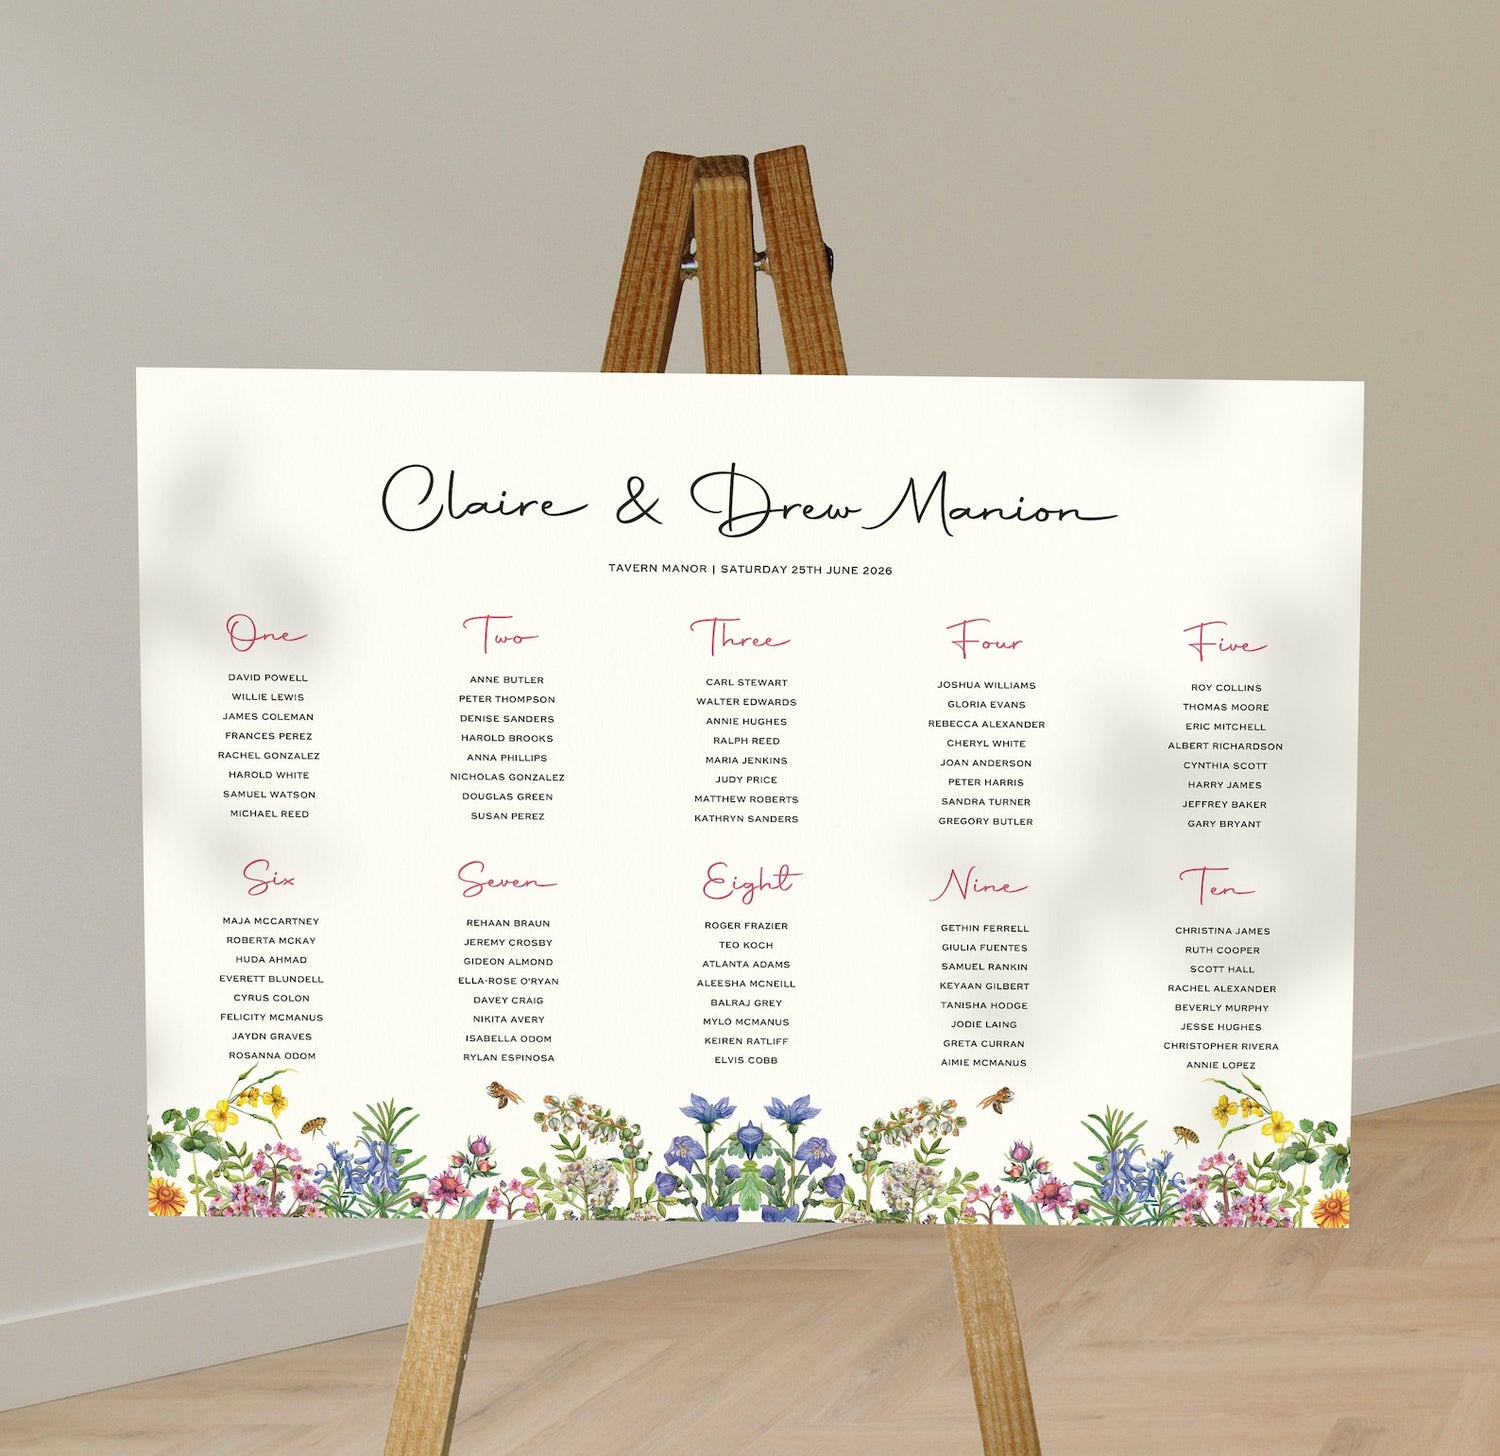 Quirky Table Plans For Weddings